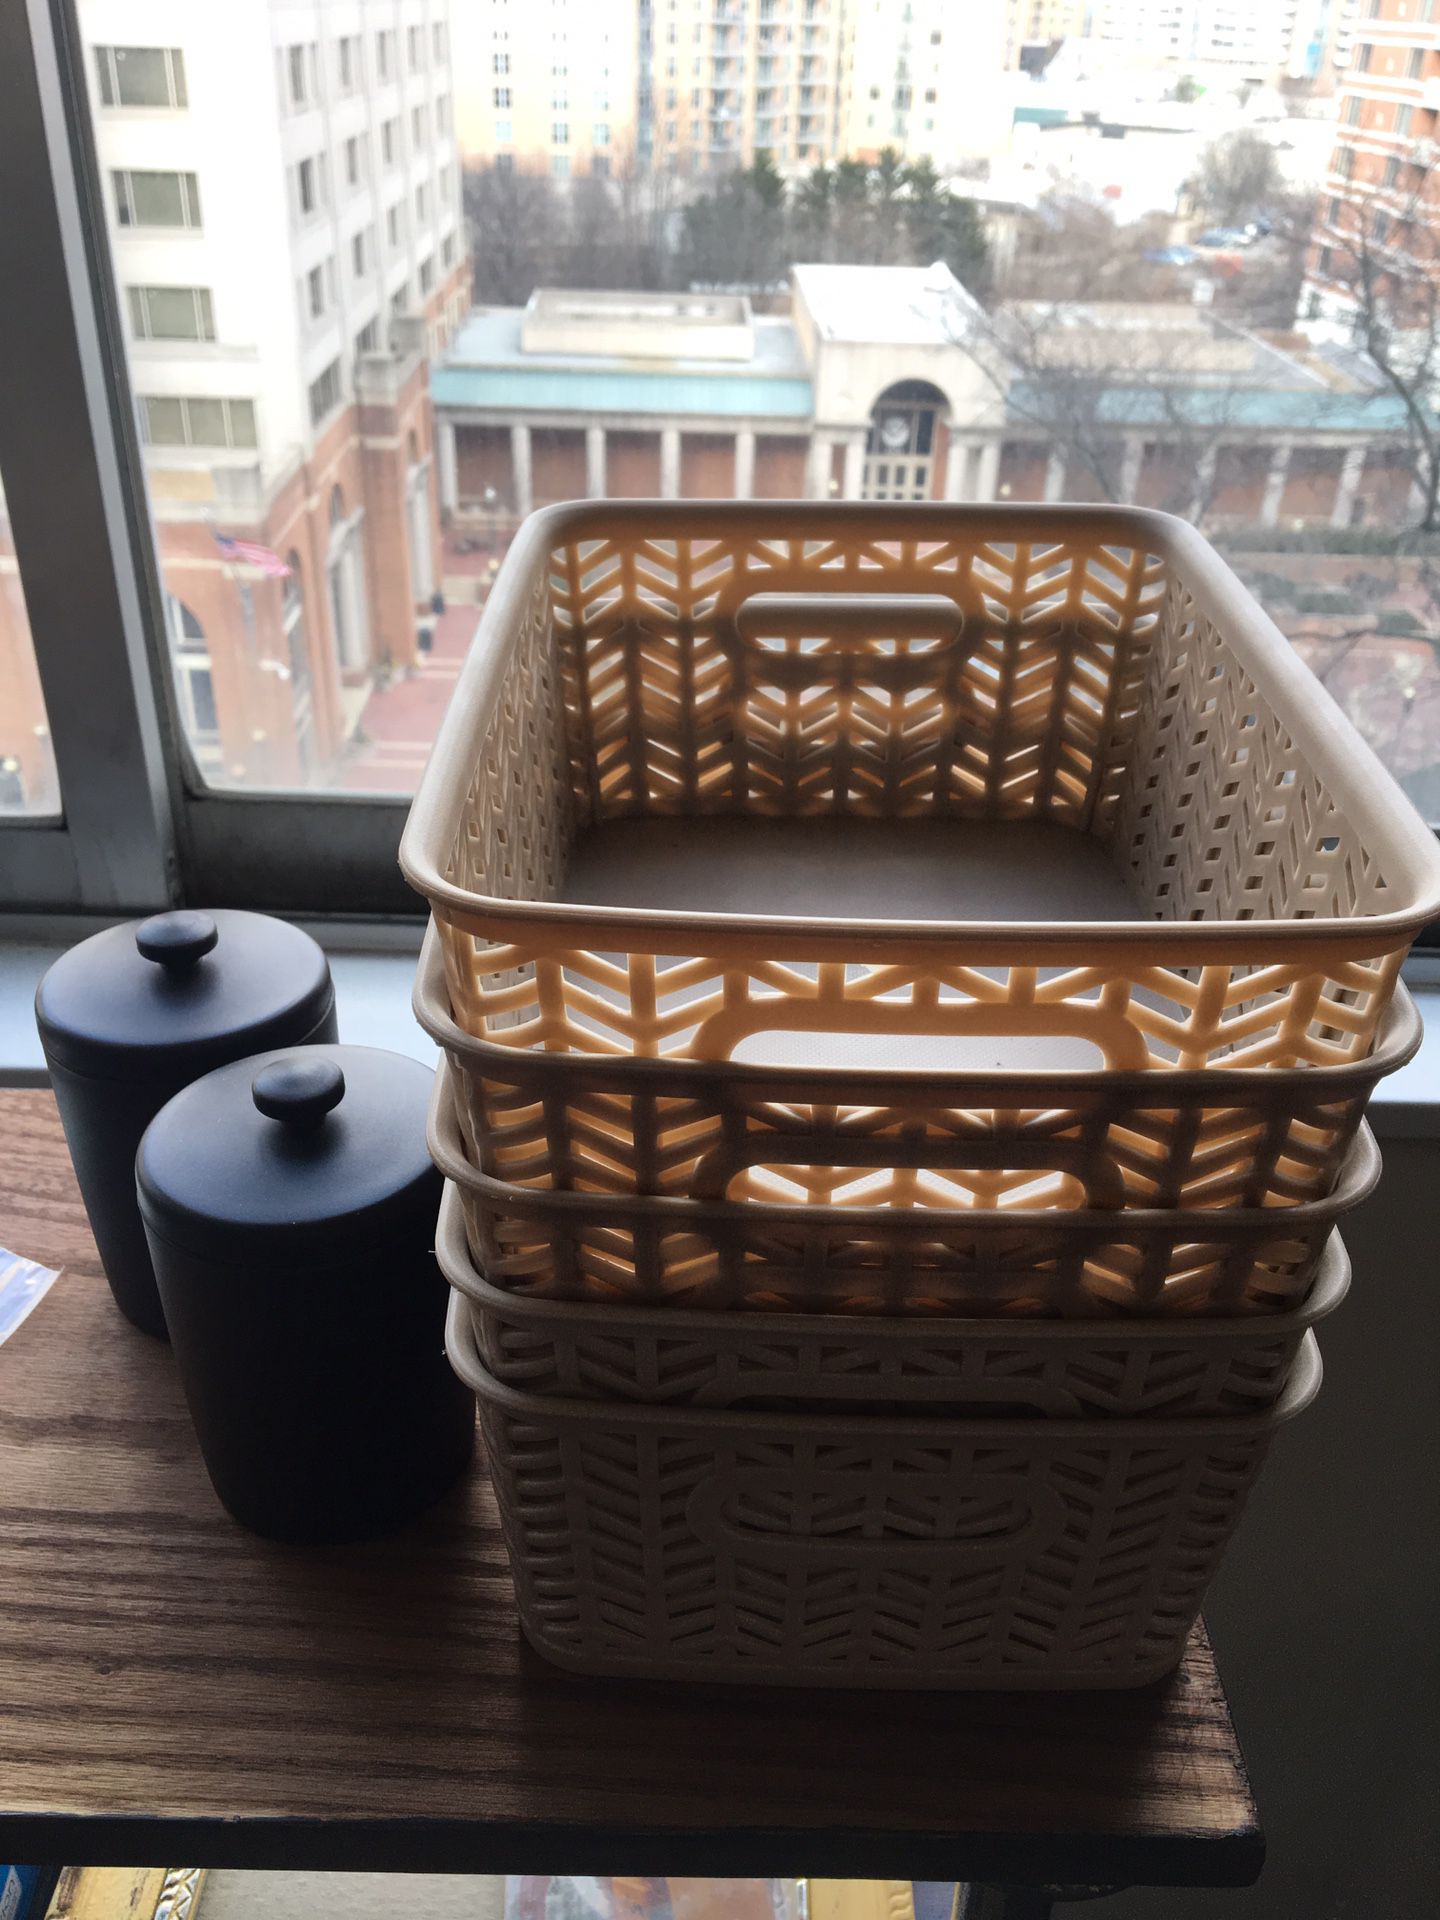 Storage bins and containers